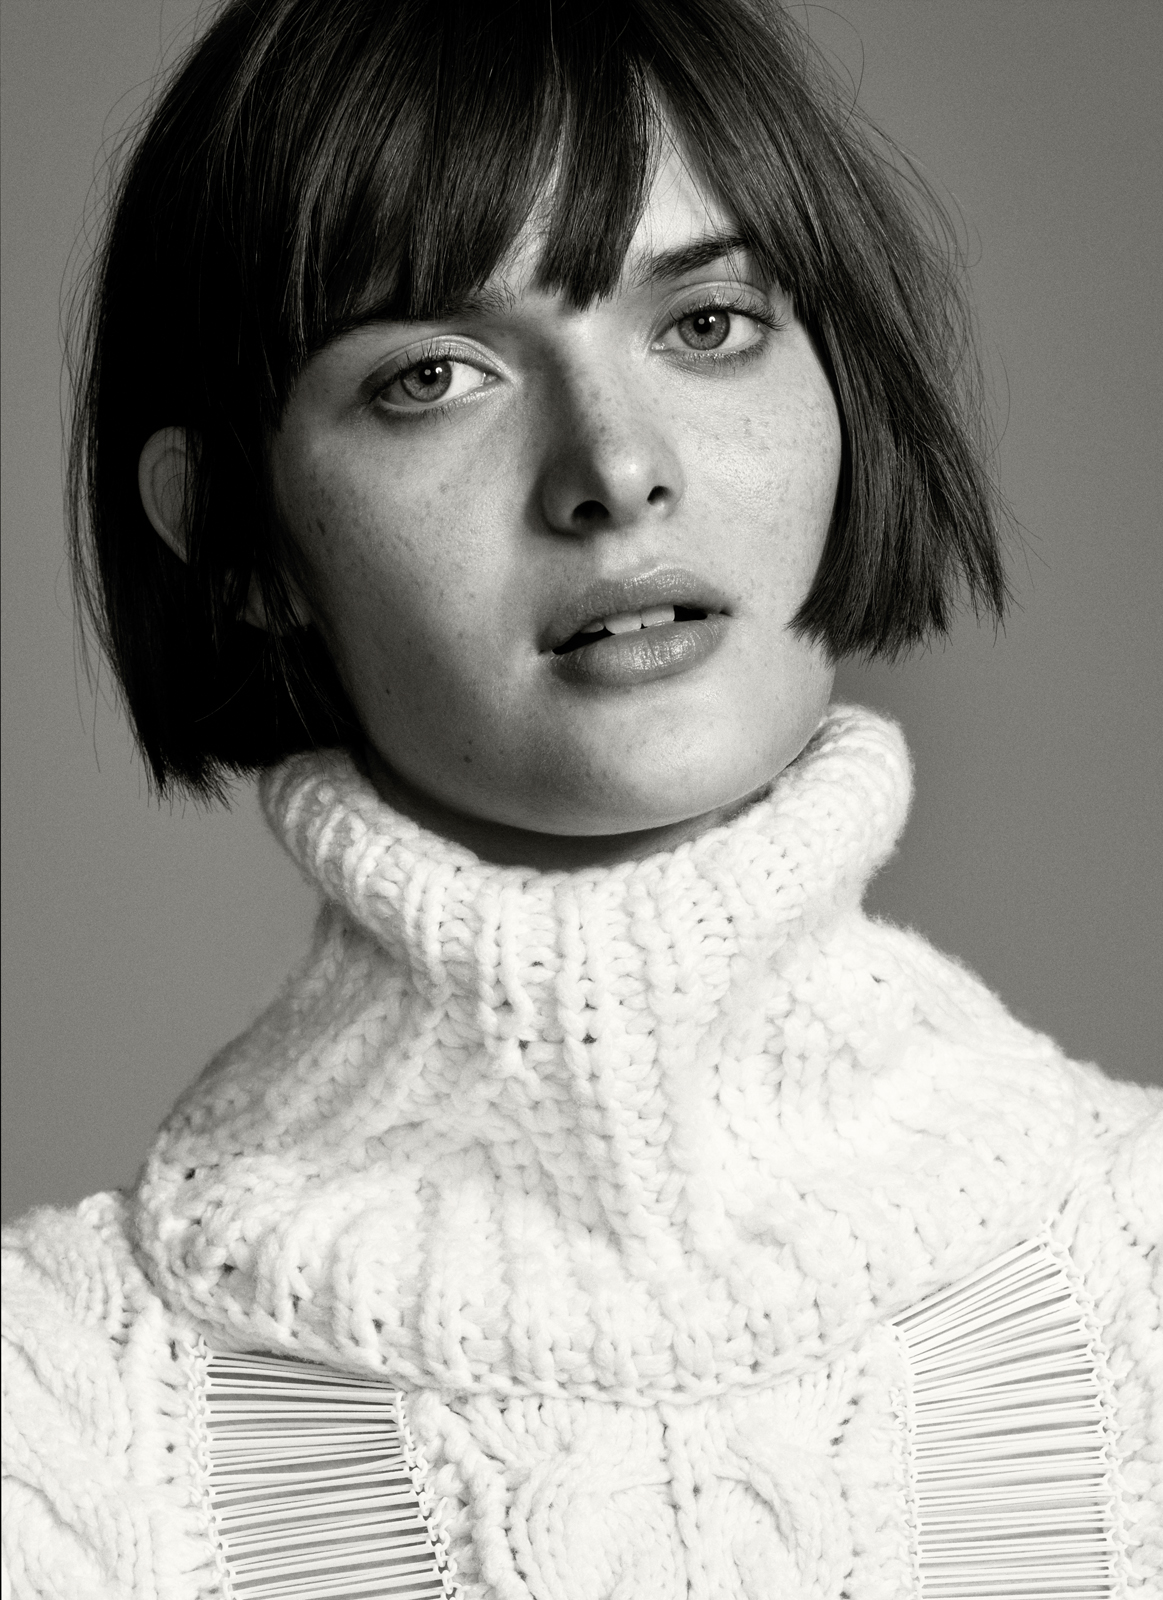 Sam Rollinson in a handmade knitted sweater with 3D printed elements, photographed by Roe Ethridge in 2014.